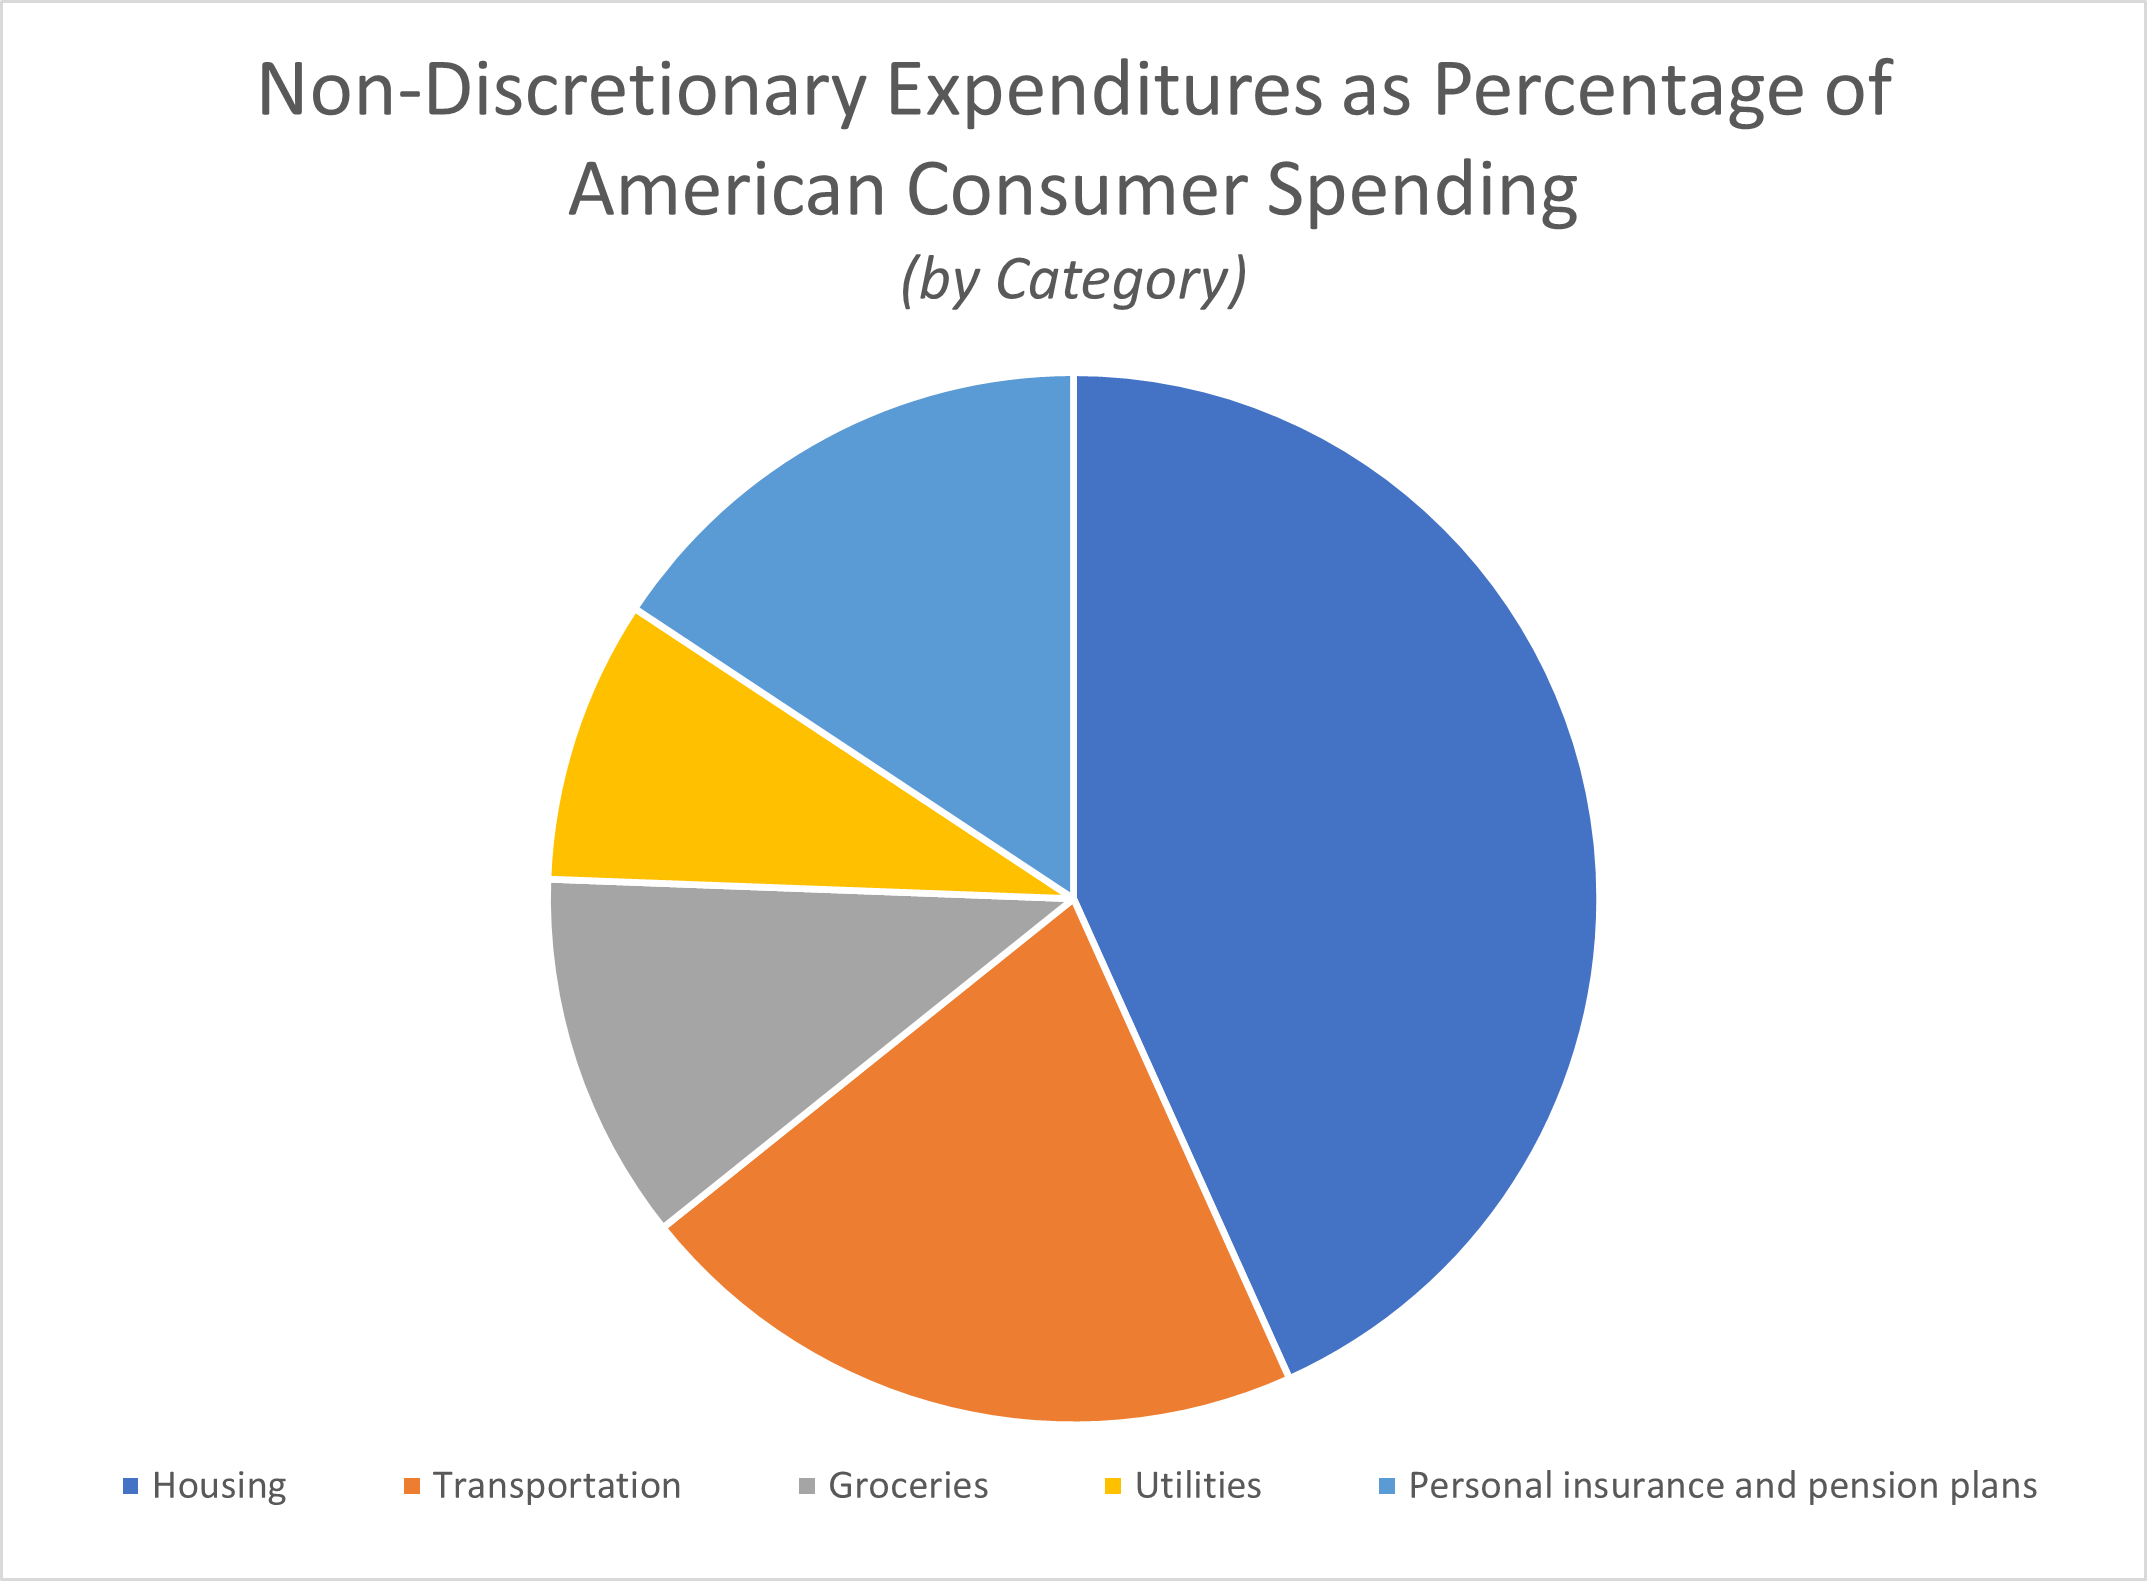 Pie chart illustrating the percentages of non-discretionary expenditures of American consumer spending